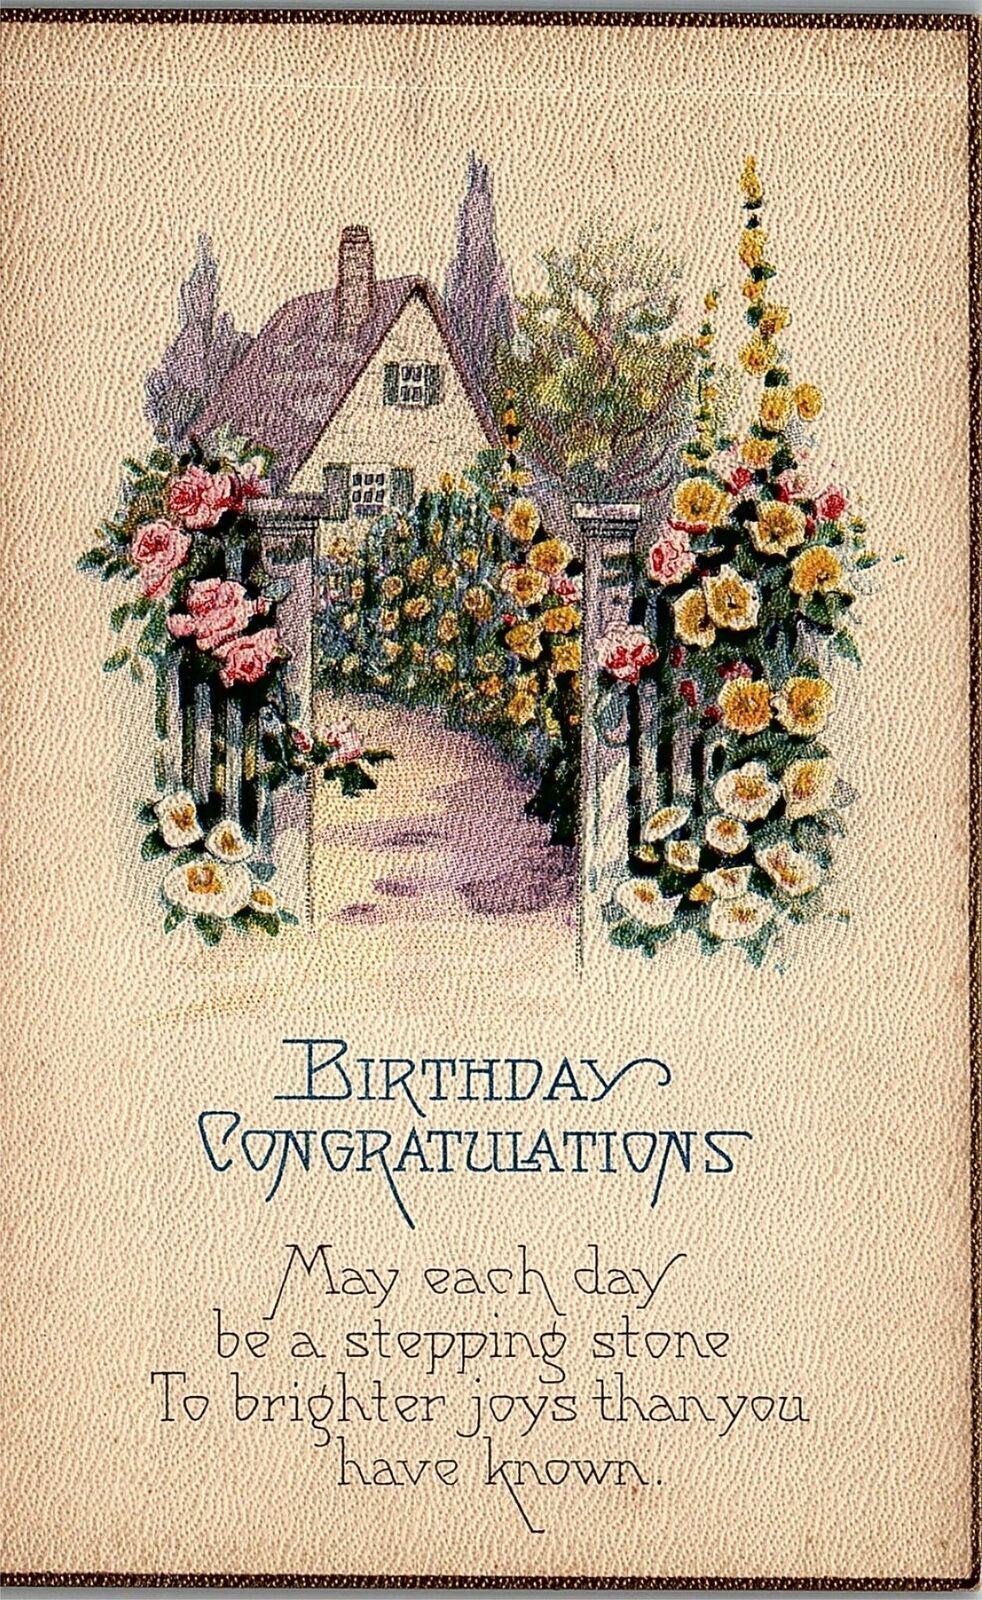 c1910 BIRTHDAY CONGRATULATIONS COTTAGE ROSES FLOWERS UNPOSTED POSTCARD 38-113